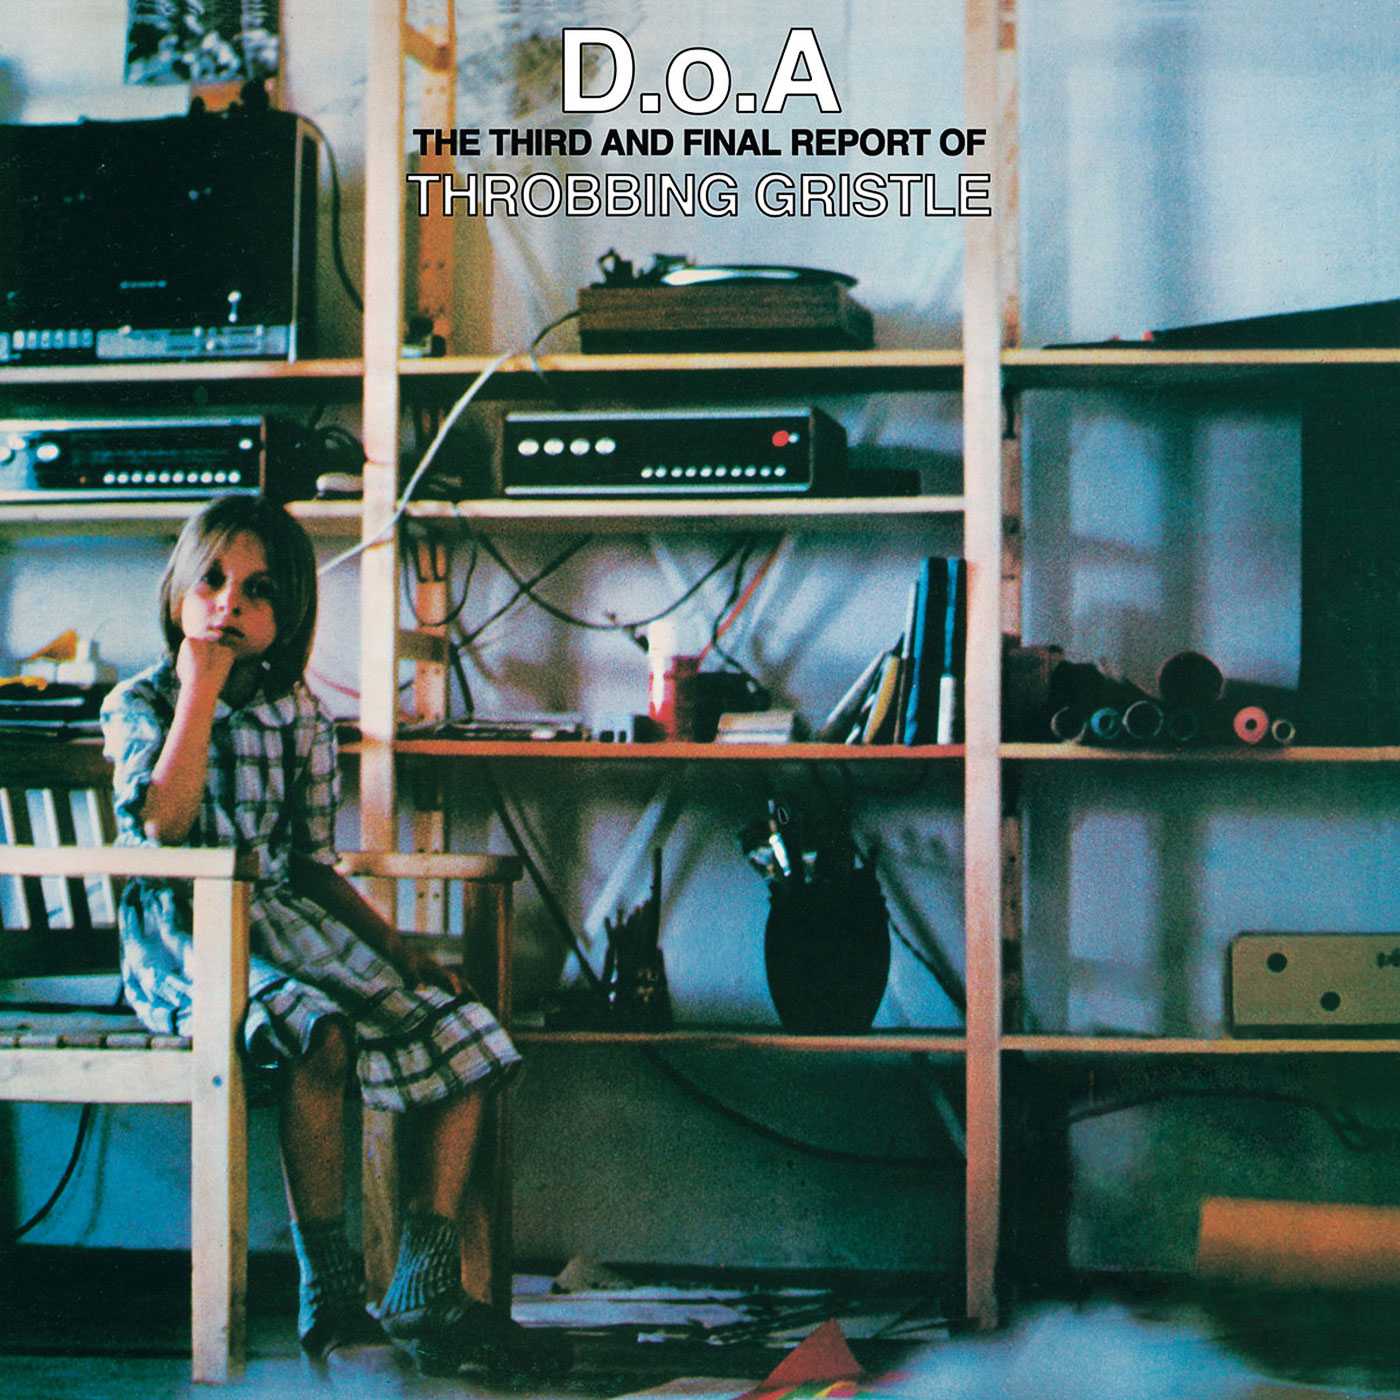 411 Throbbing Gristle – D.o.A: Third and Final Report